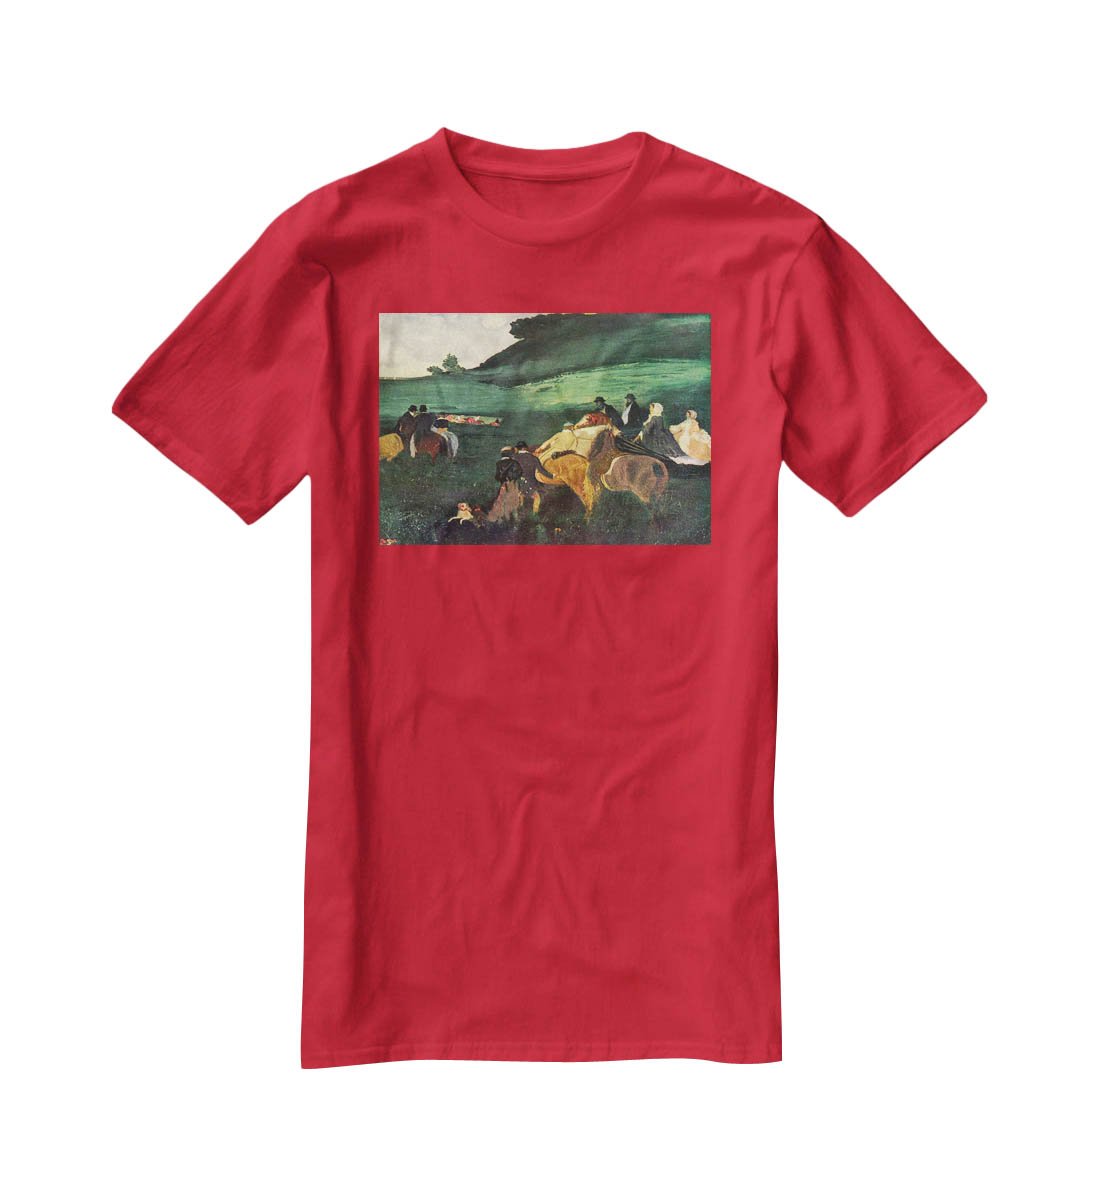 Riders in the landscape by Degas T-Shirt - Canvas Art Rocks - 4